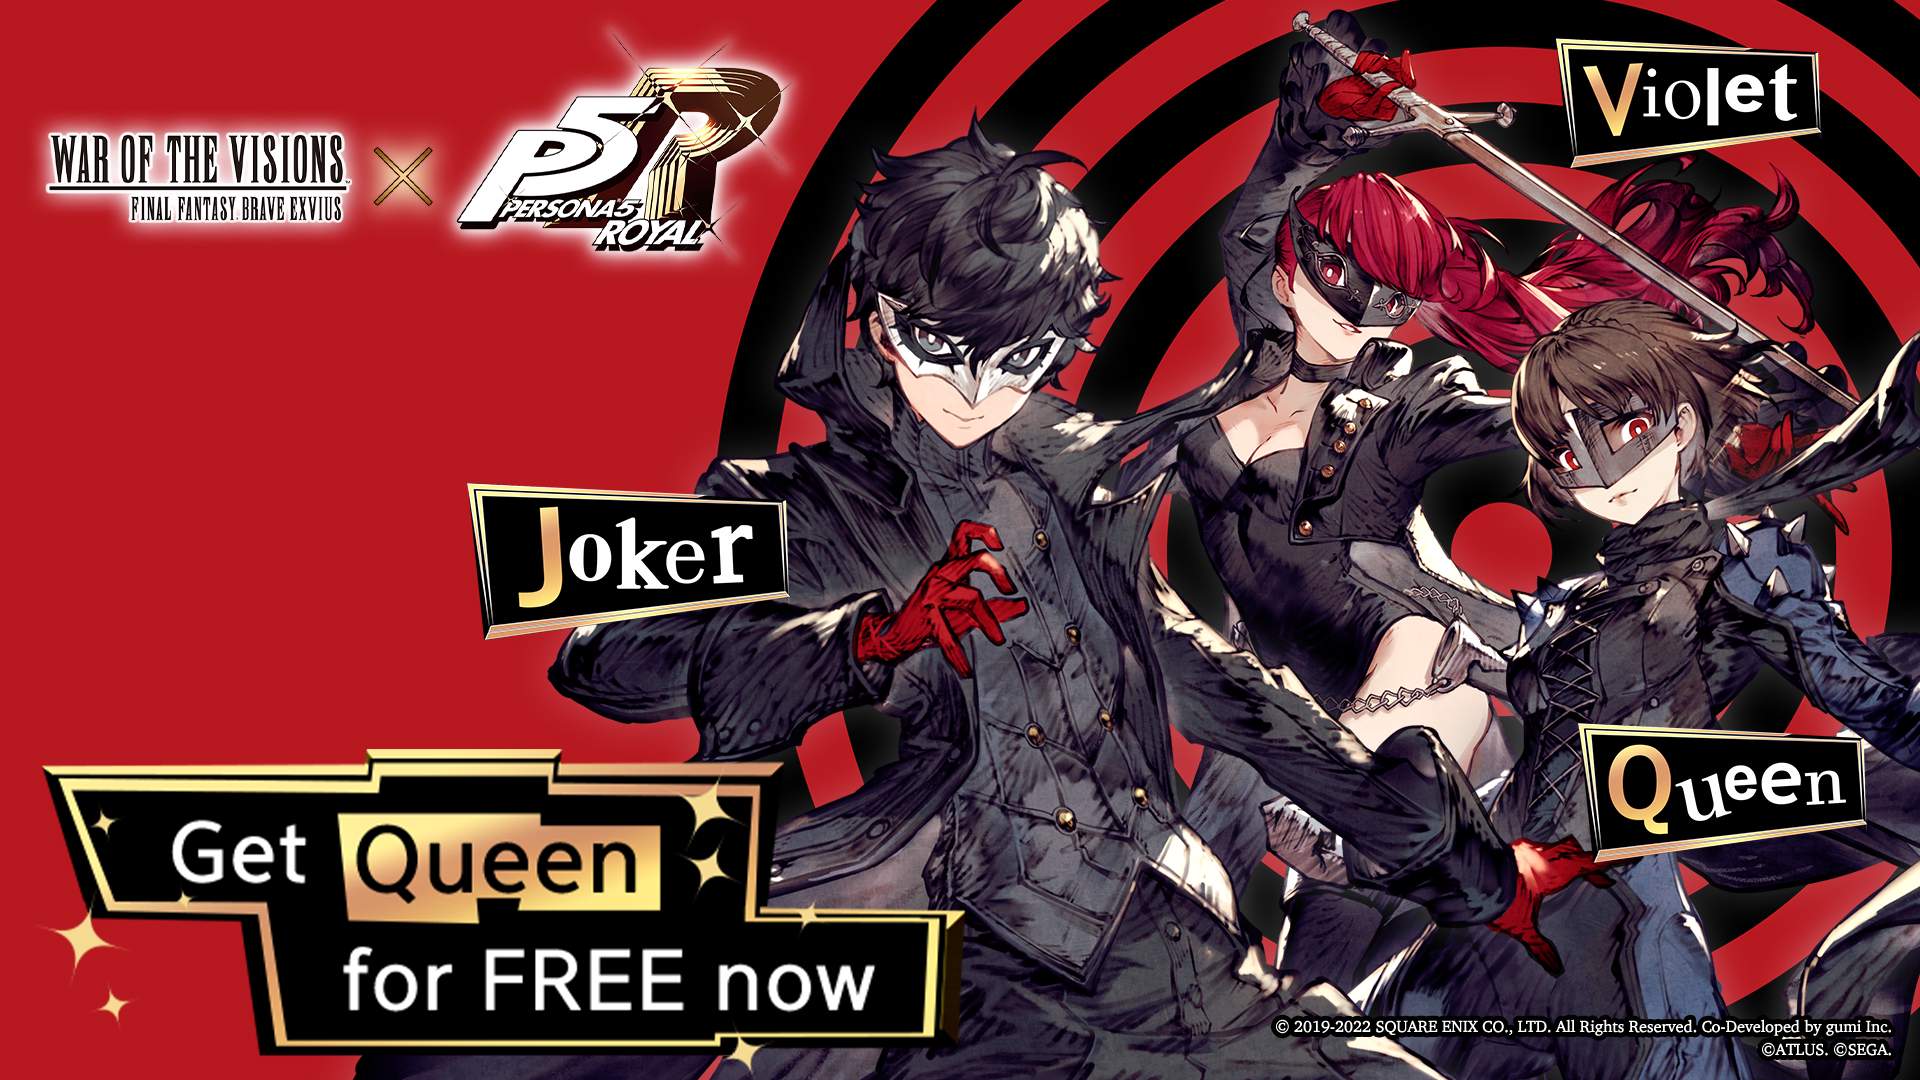 Joker, Queen and Violet from Persona 5 Royal line up for the WOTV collaboration.